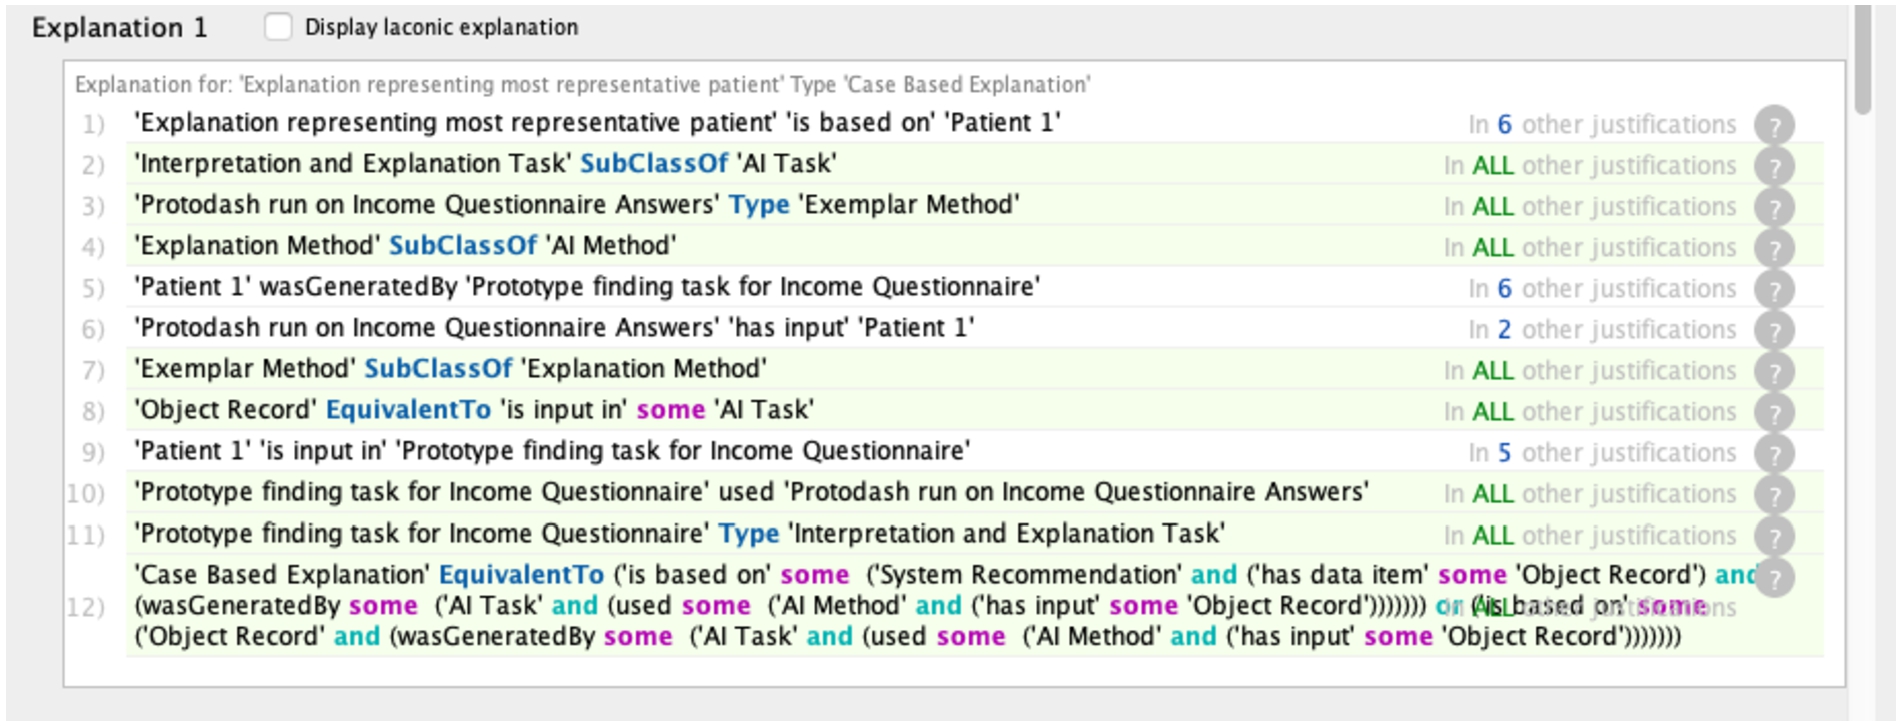 A screenshot from the Protege ontology editing tool identifying the rules that were satisfied for a particular explanation to be classified as a case based explanation.